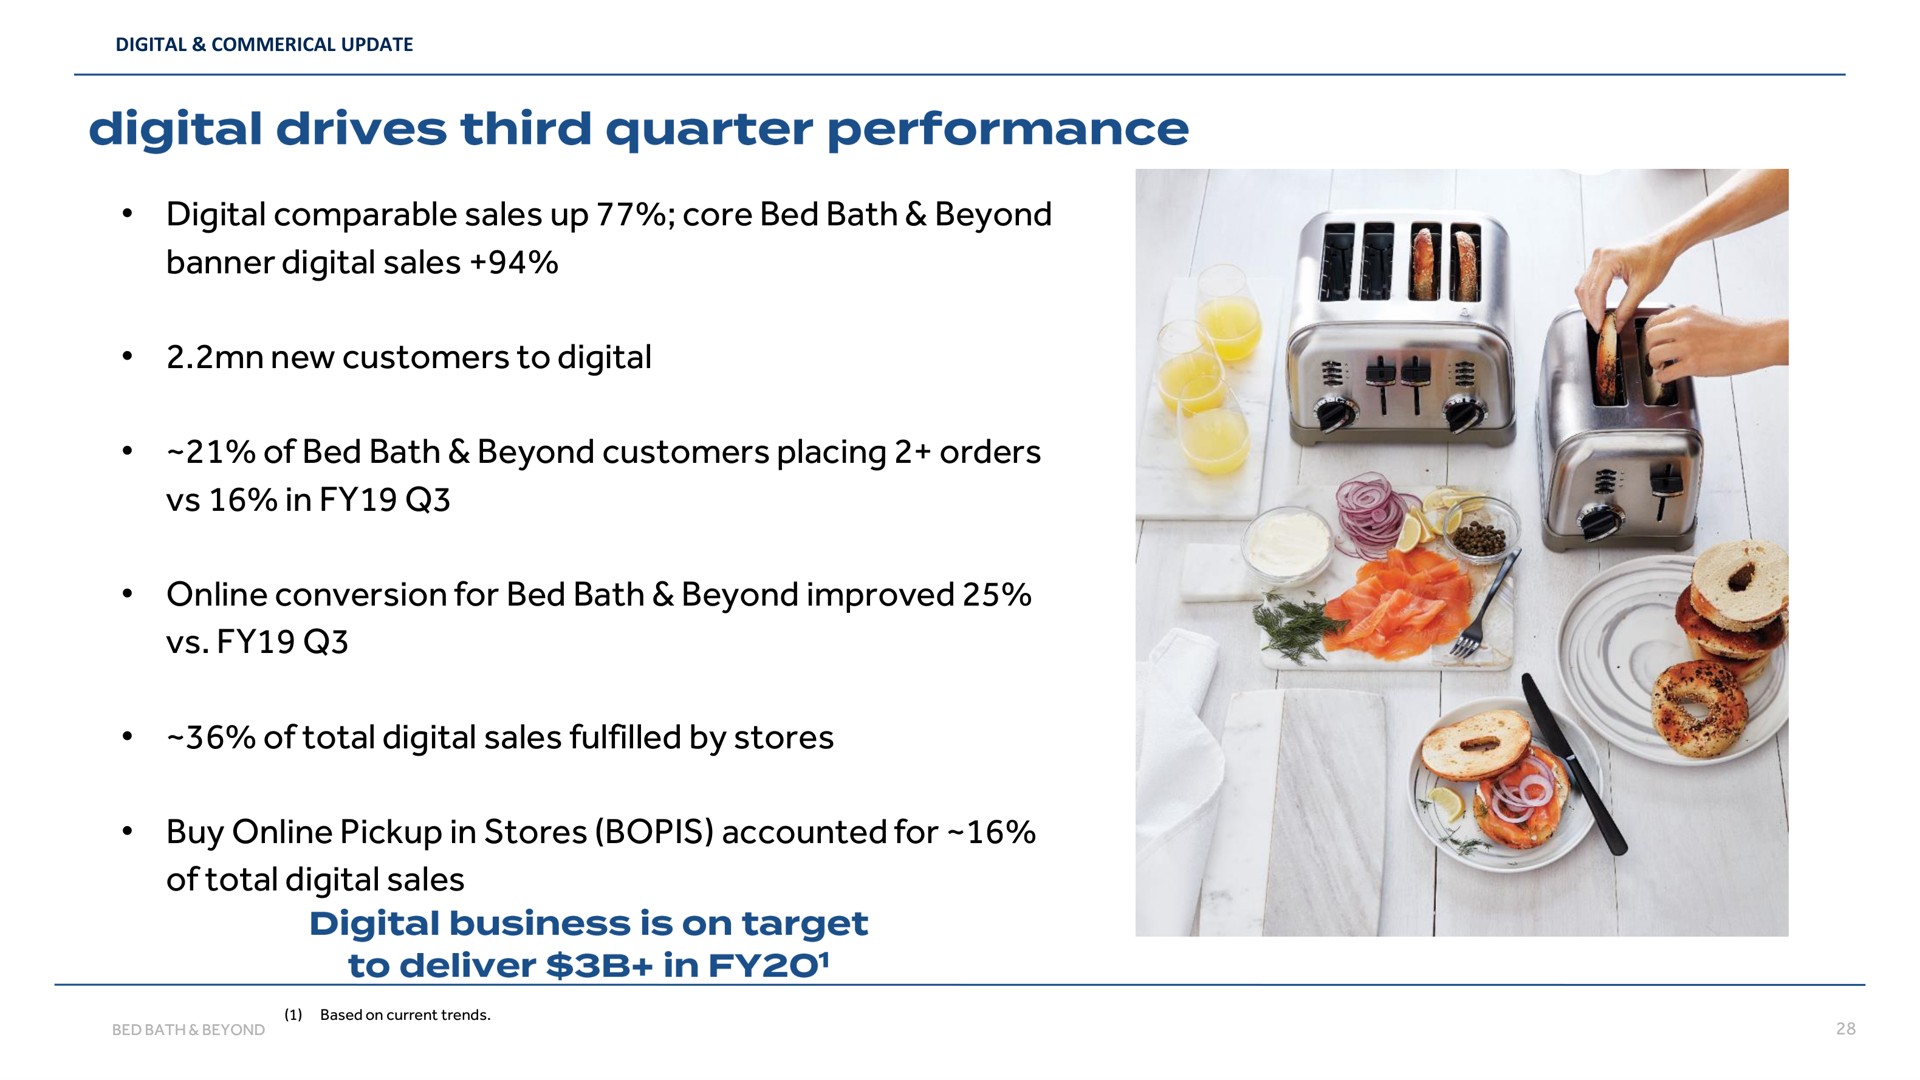 digital comparable sales up core bed bath beyond banner digital sales new customers to digital of bed bath beyond customers placing orders in conversion for bed bath beyond improved of total digital sales by stores buy pickup in stores accounted for of total digital sales drives third quarter performance | Bed Bath & Beyond